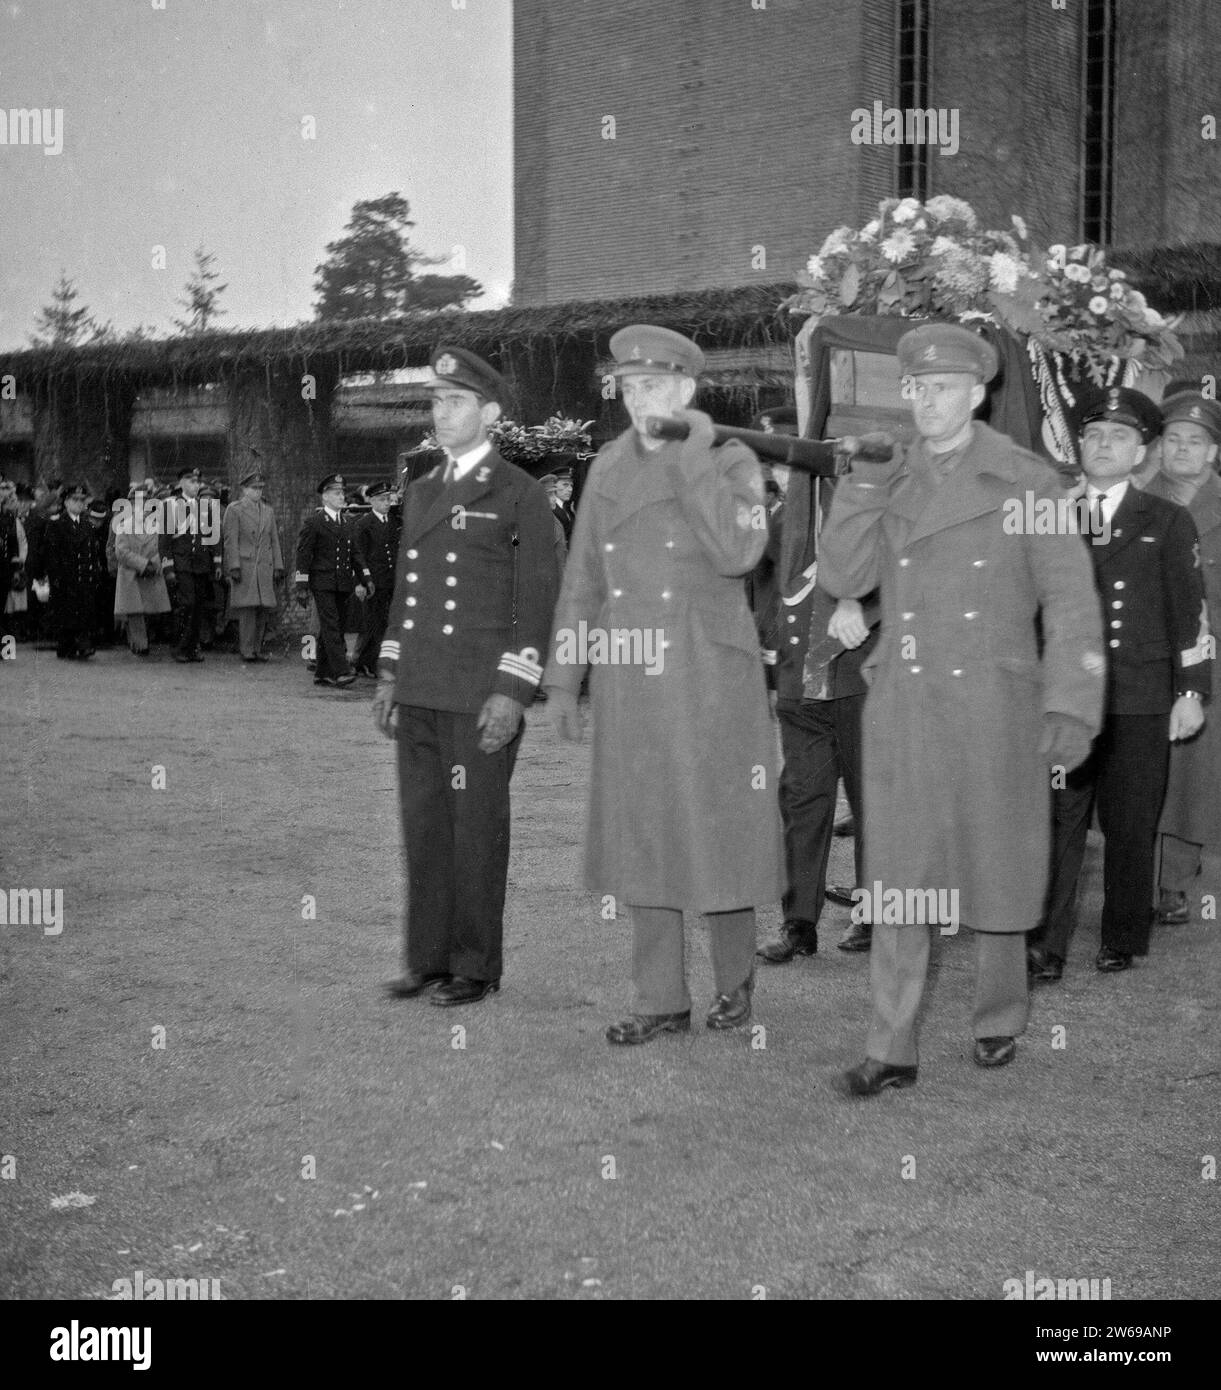 Officers of the army and navy carry the bier during a military funeral ca. undated Stock Photo